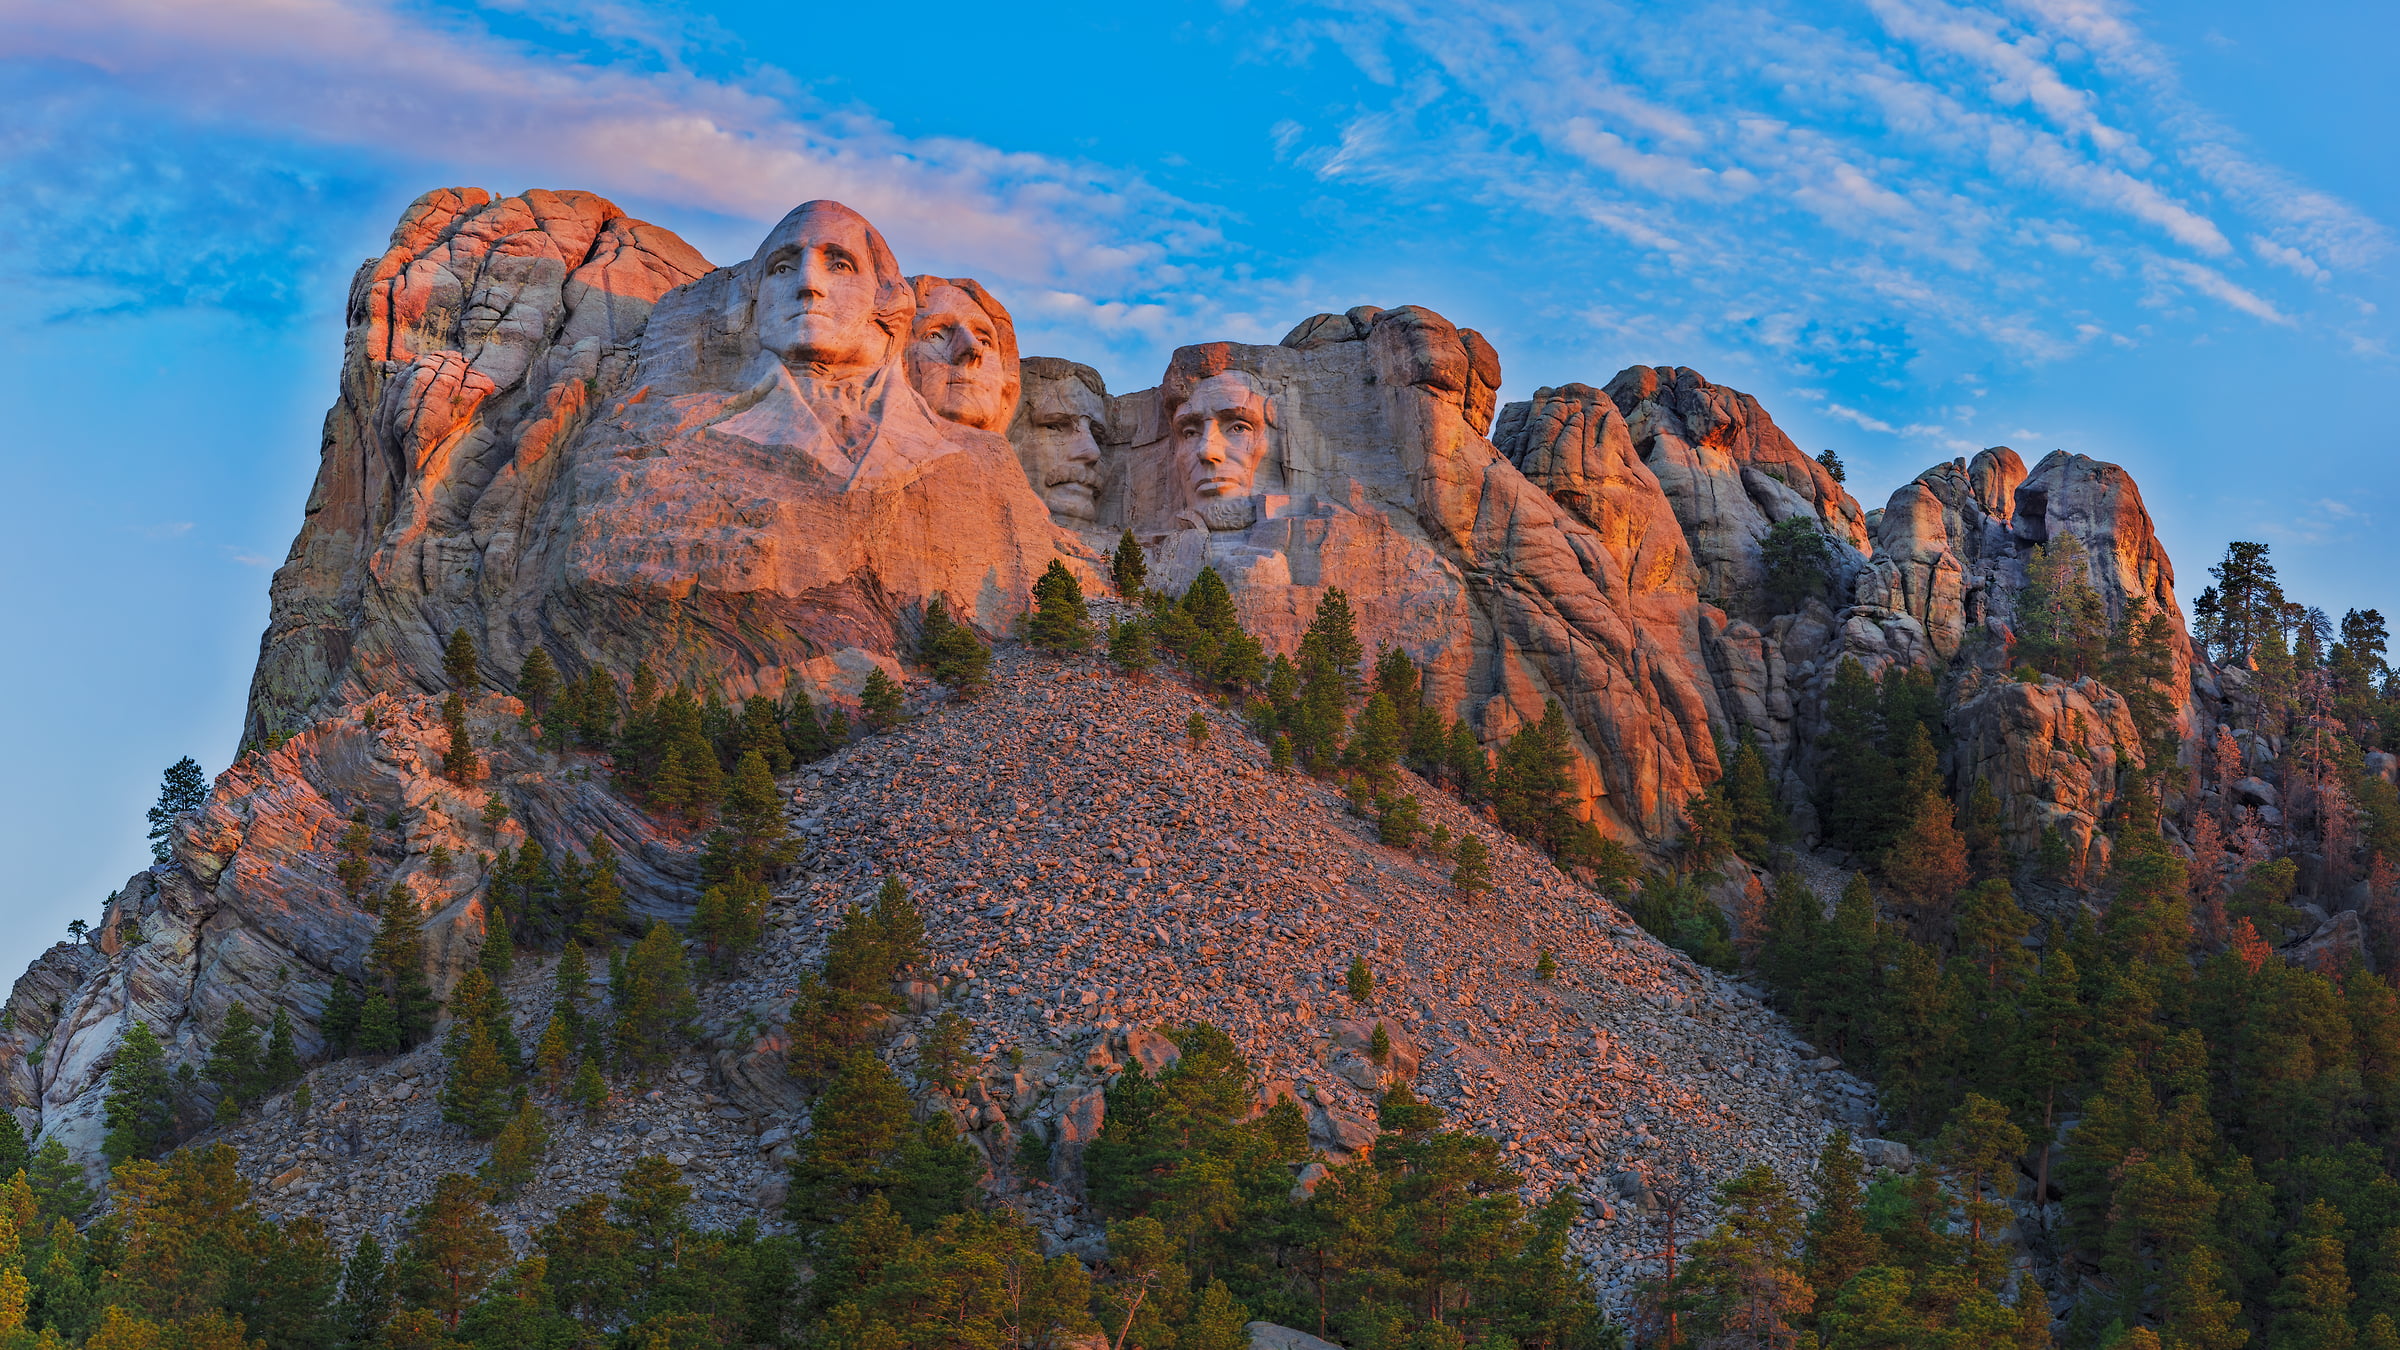 1,485 megapixels! A very high resolution, large-format VAST photo print of Mount Rushmore at sunrise; landscape photograph created by John Freeman in Mount Rushmore National Memorial, South Dakota.